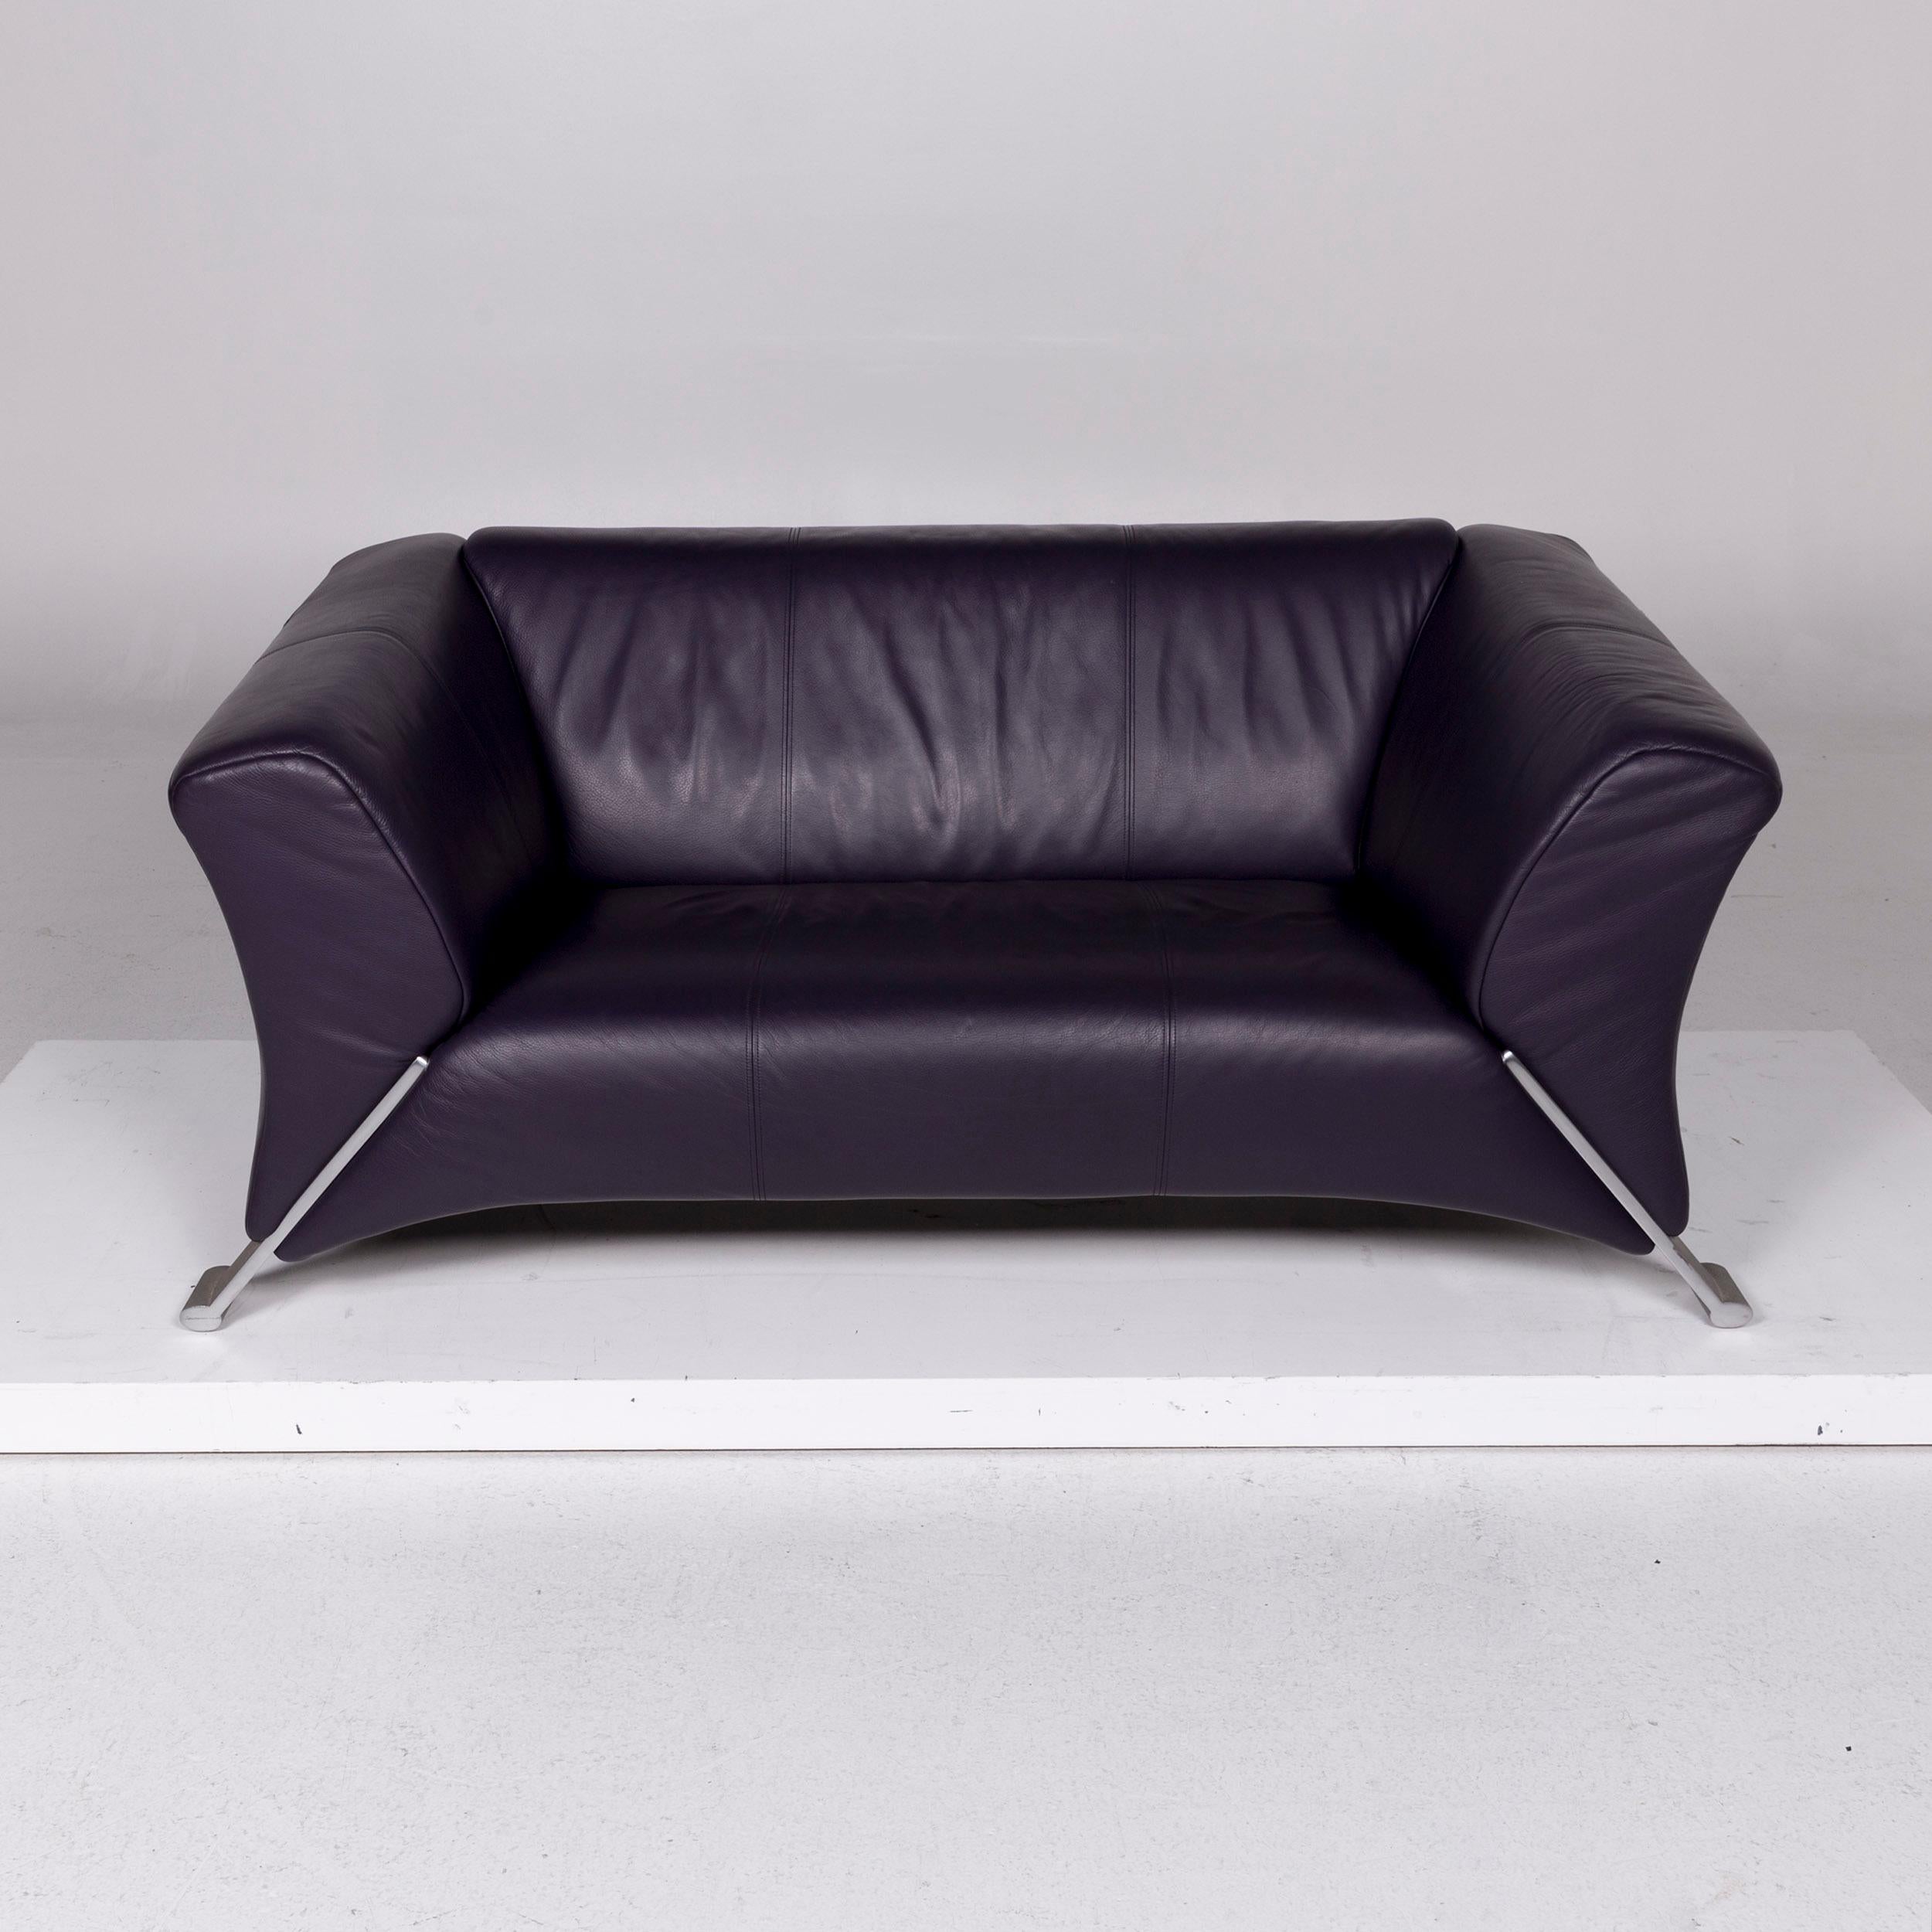 Rolf Benz 322 Leather Sofa Violet Two-Seat Couch In Good Condition For Sale In Cologne, DE